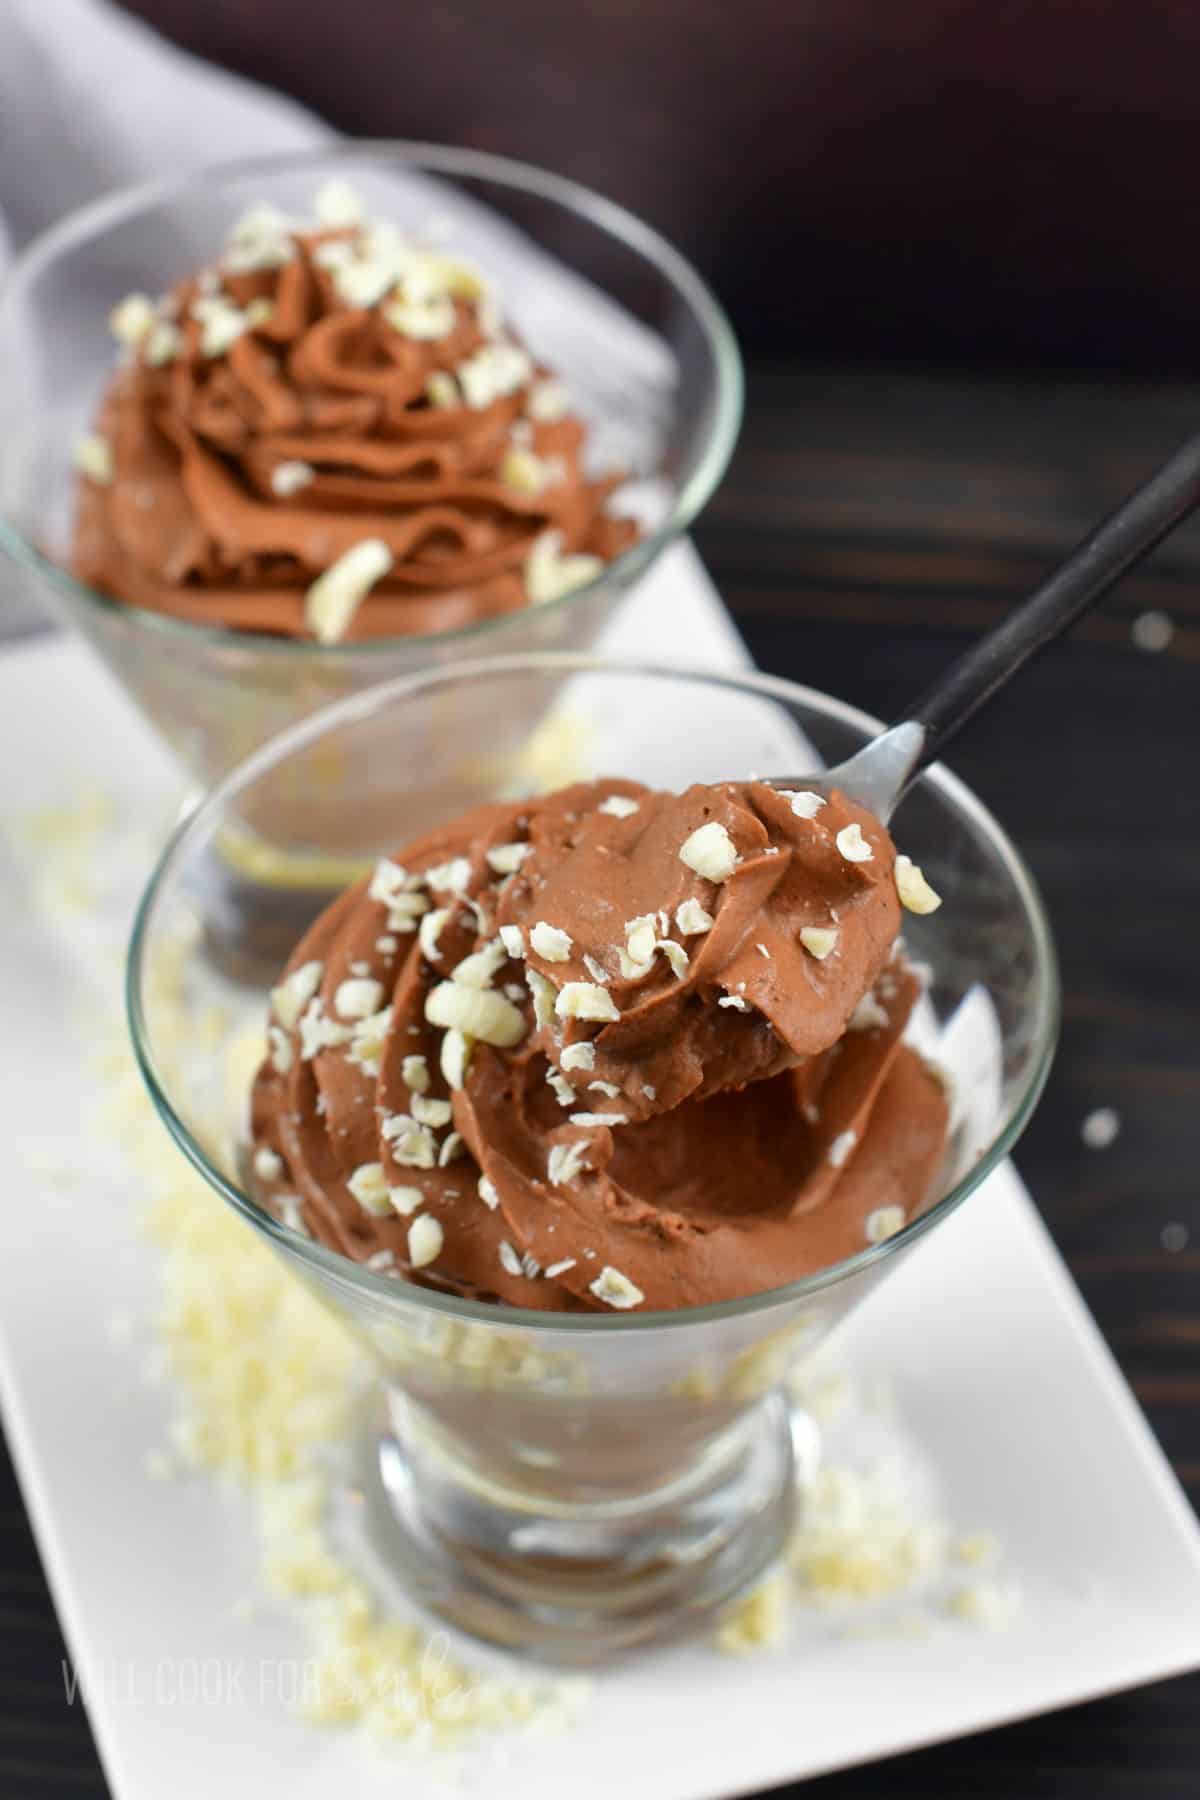 scooping out chocolate mousse with a dessert school from a clear glass.